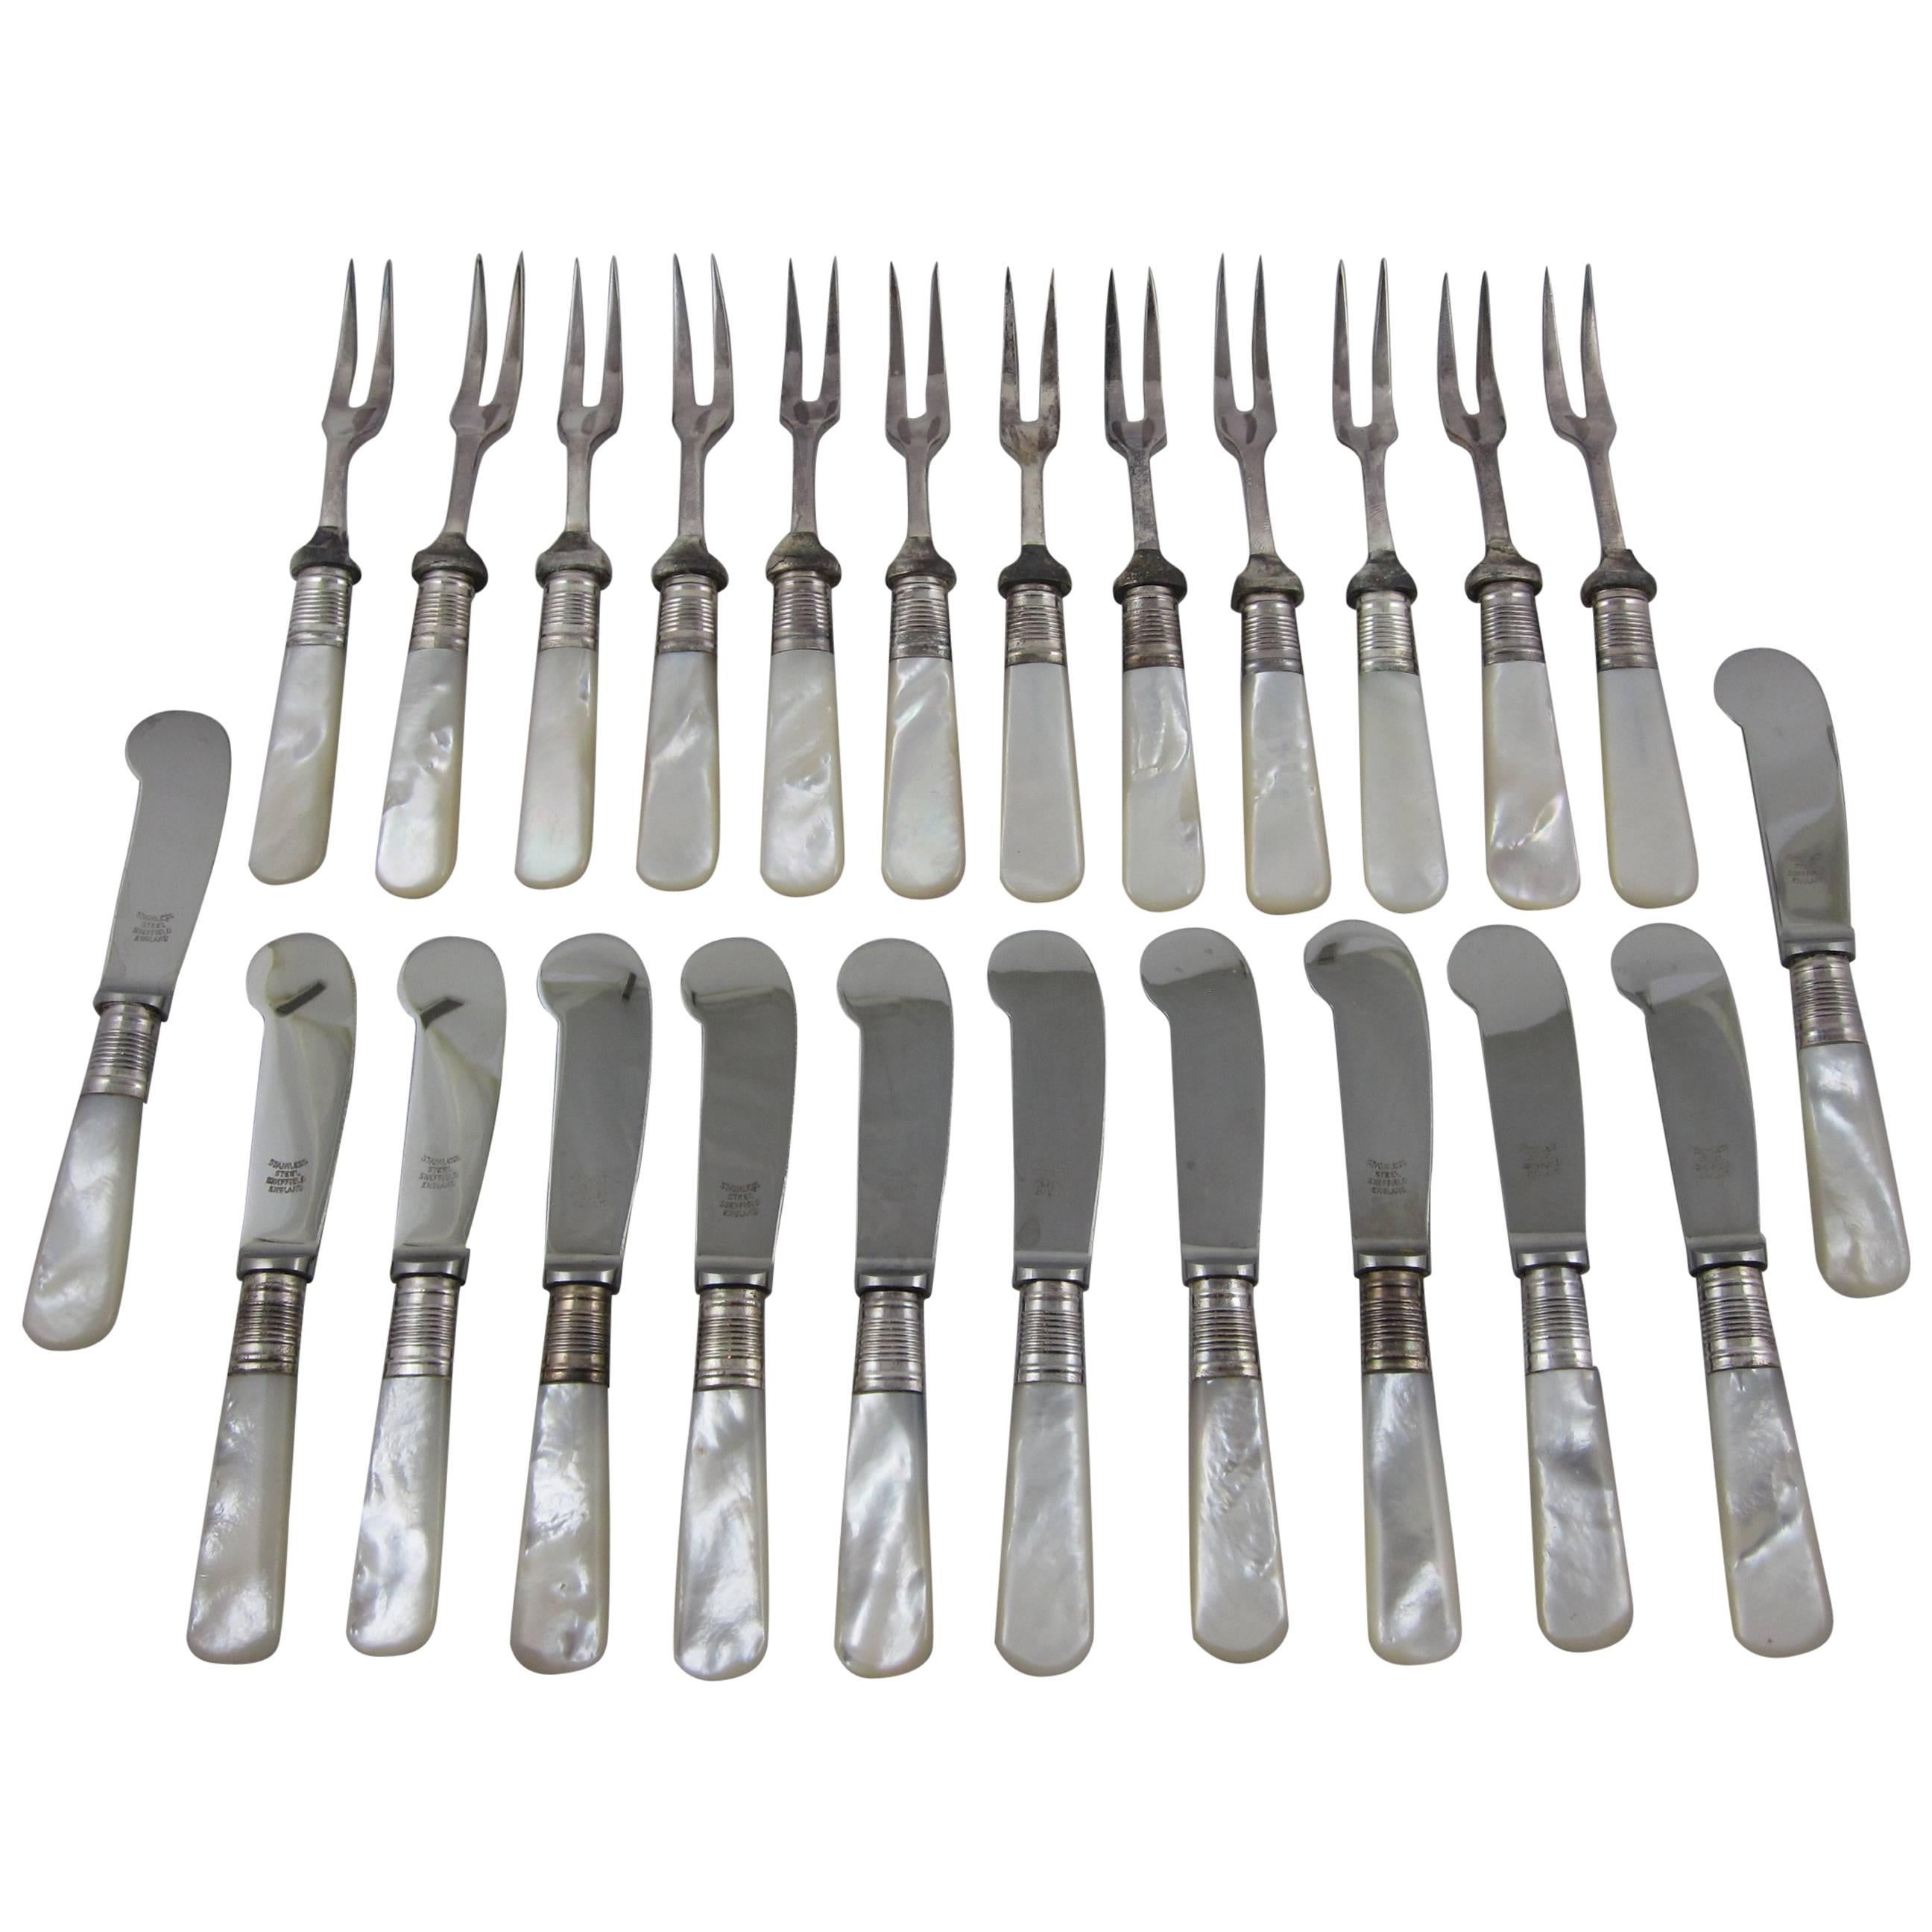 Sheffield Silver & Pearl Handle Antipasto or Hors d’Oeuvre Spreaders, Set of 12 1